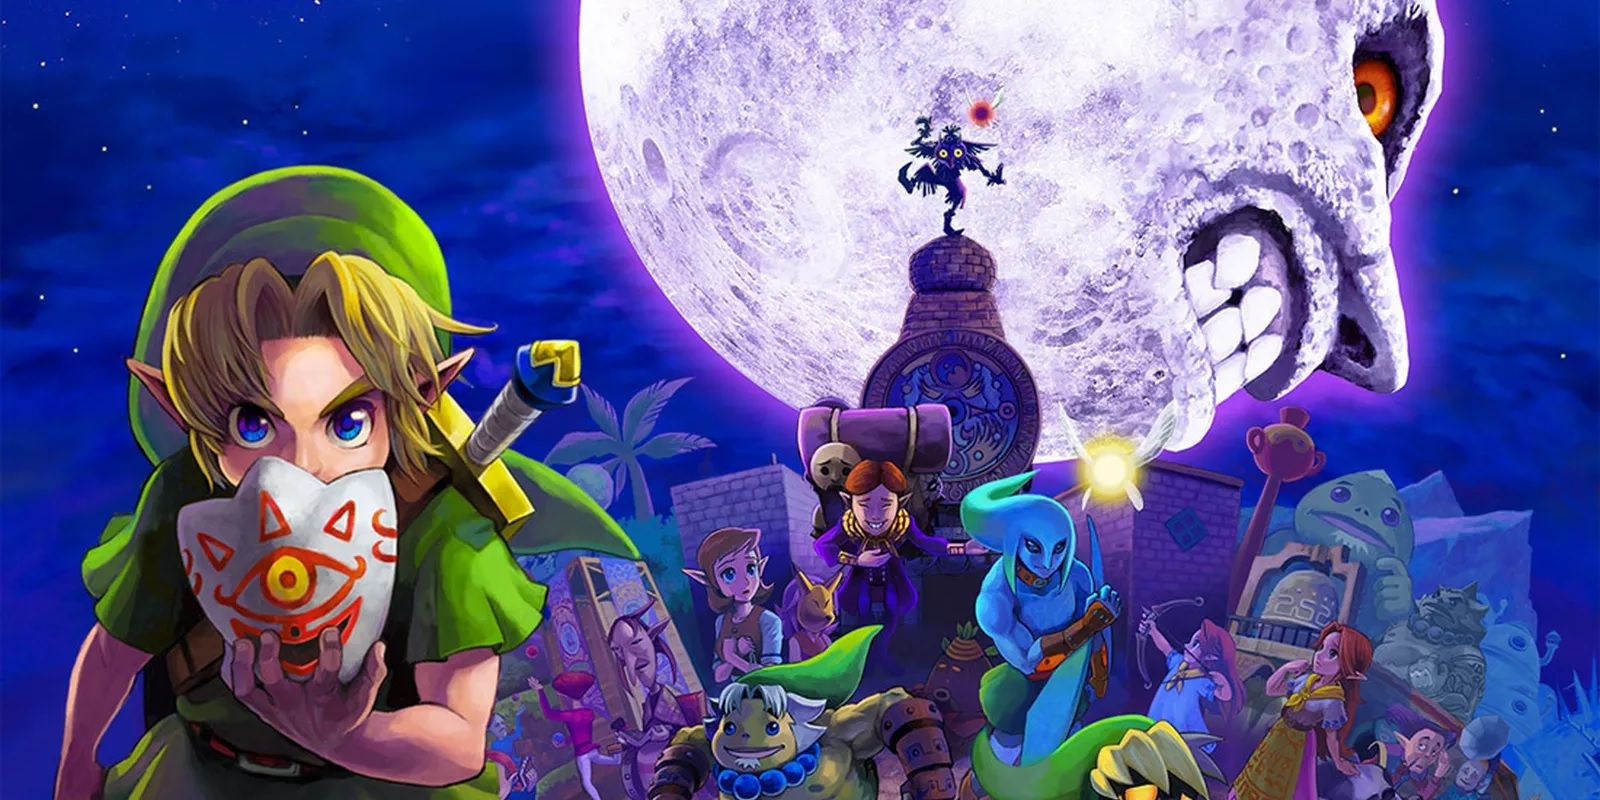 Key art for The Legend of Zelda: Majora's Mask showing Link and many of the game's other characters with the moon lurking above.